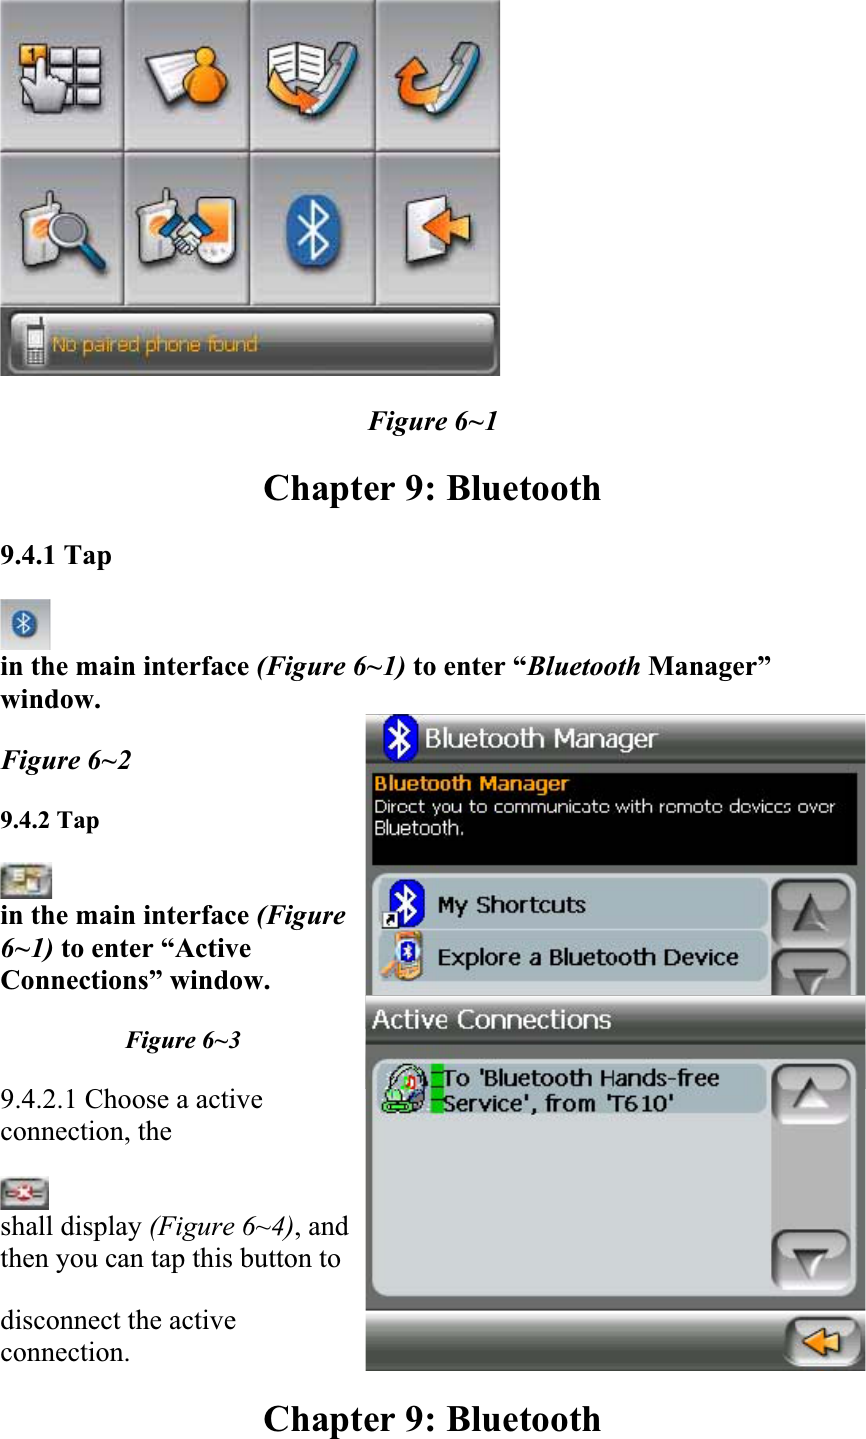 Figure 6~1 Chapter 9: Bluetooth 9.4.1 Tapin the main interface (Figure 6~1) to enter “Bluetooth Manager” window.Figure 6~2 9.4.2 Tapin the main interface (Figure6~1) to enter “Active Connections” window.Figure 6~3 9.4.2.1 Choose a active connection, theshall display (Figure 6~4), and then you can tap this button to  disconnect the active connection.Chapter 9: Bluetooth 